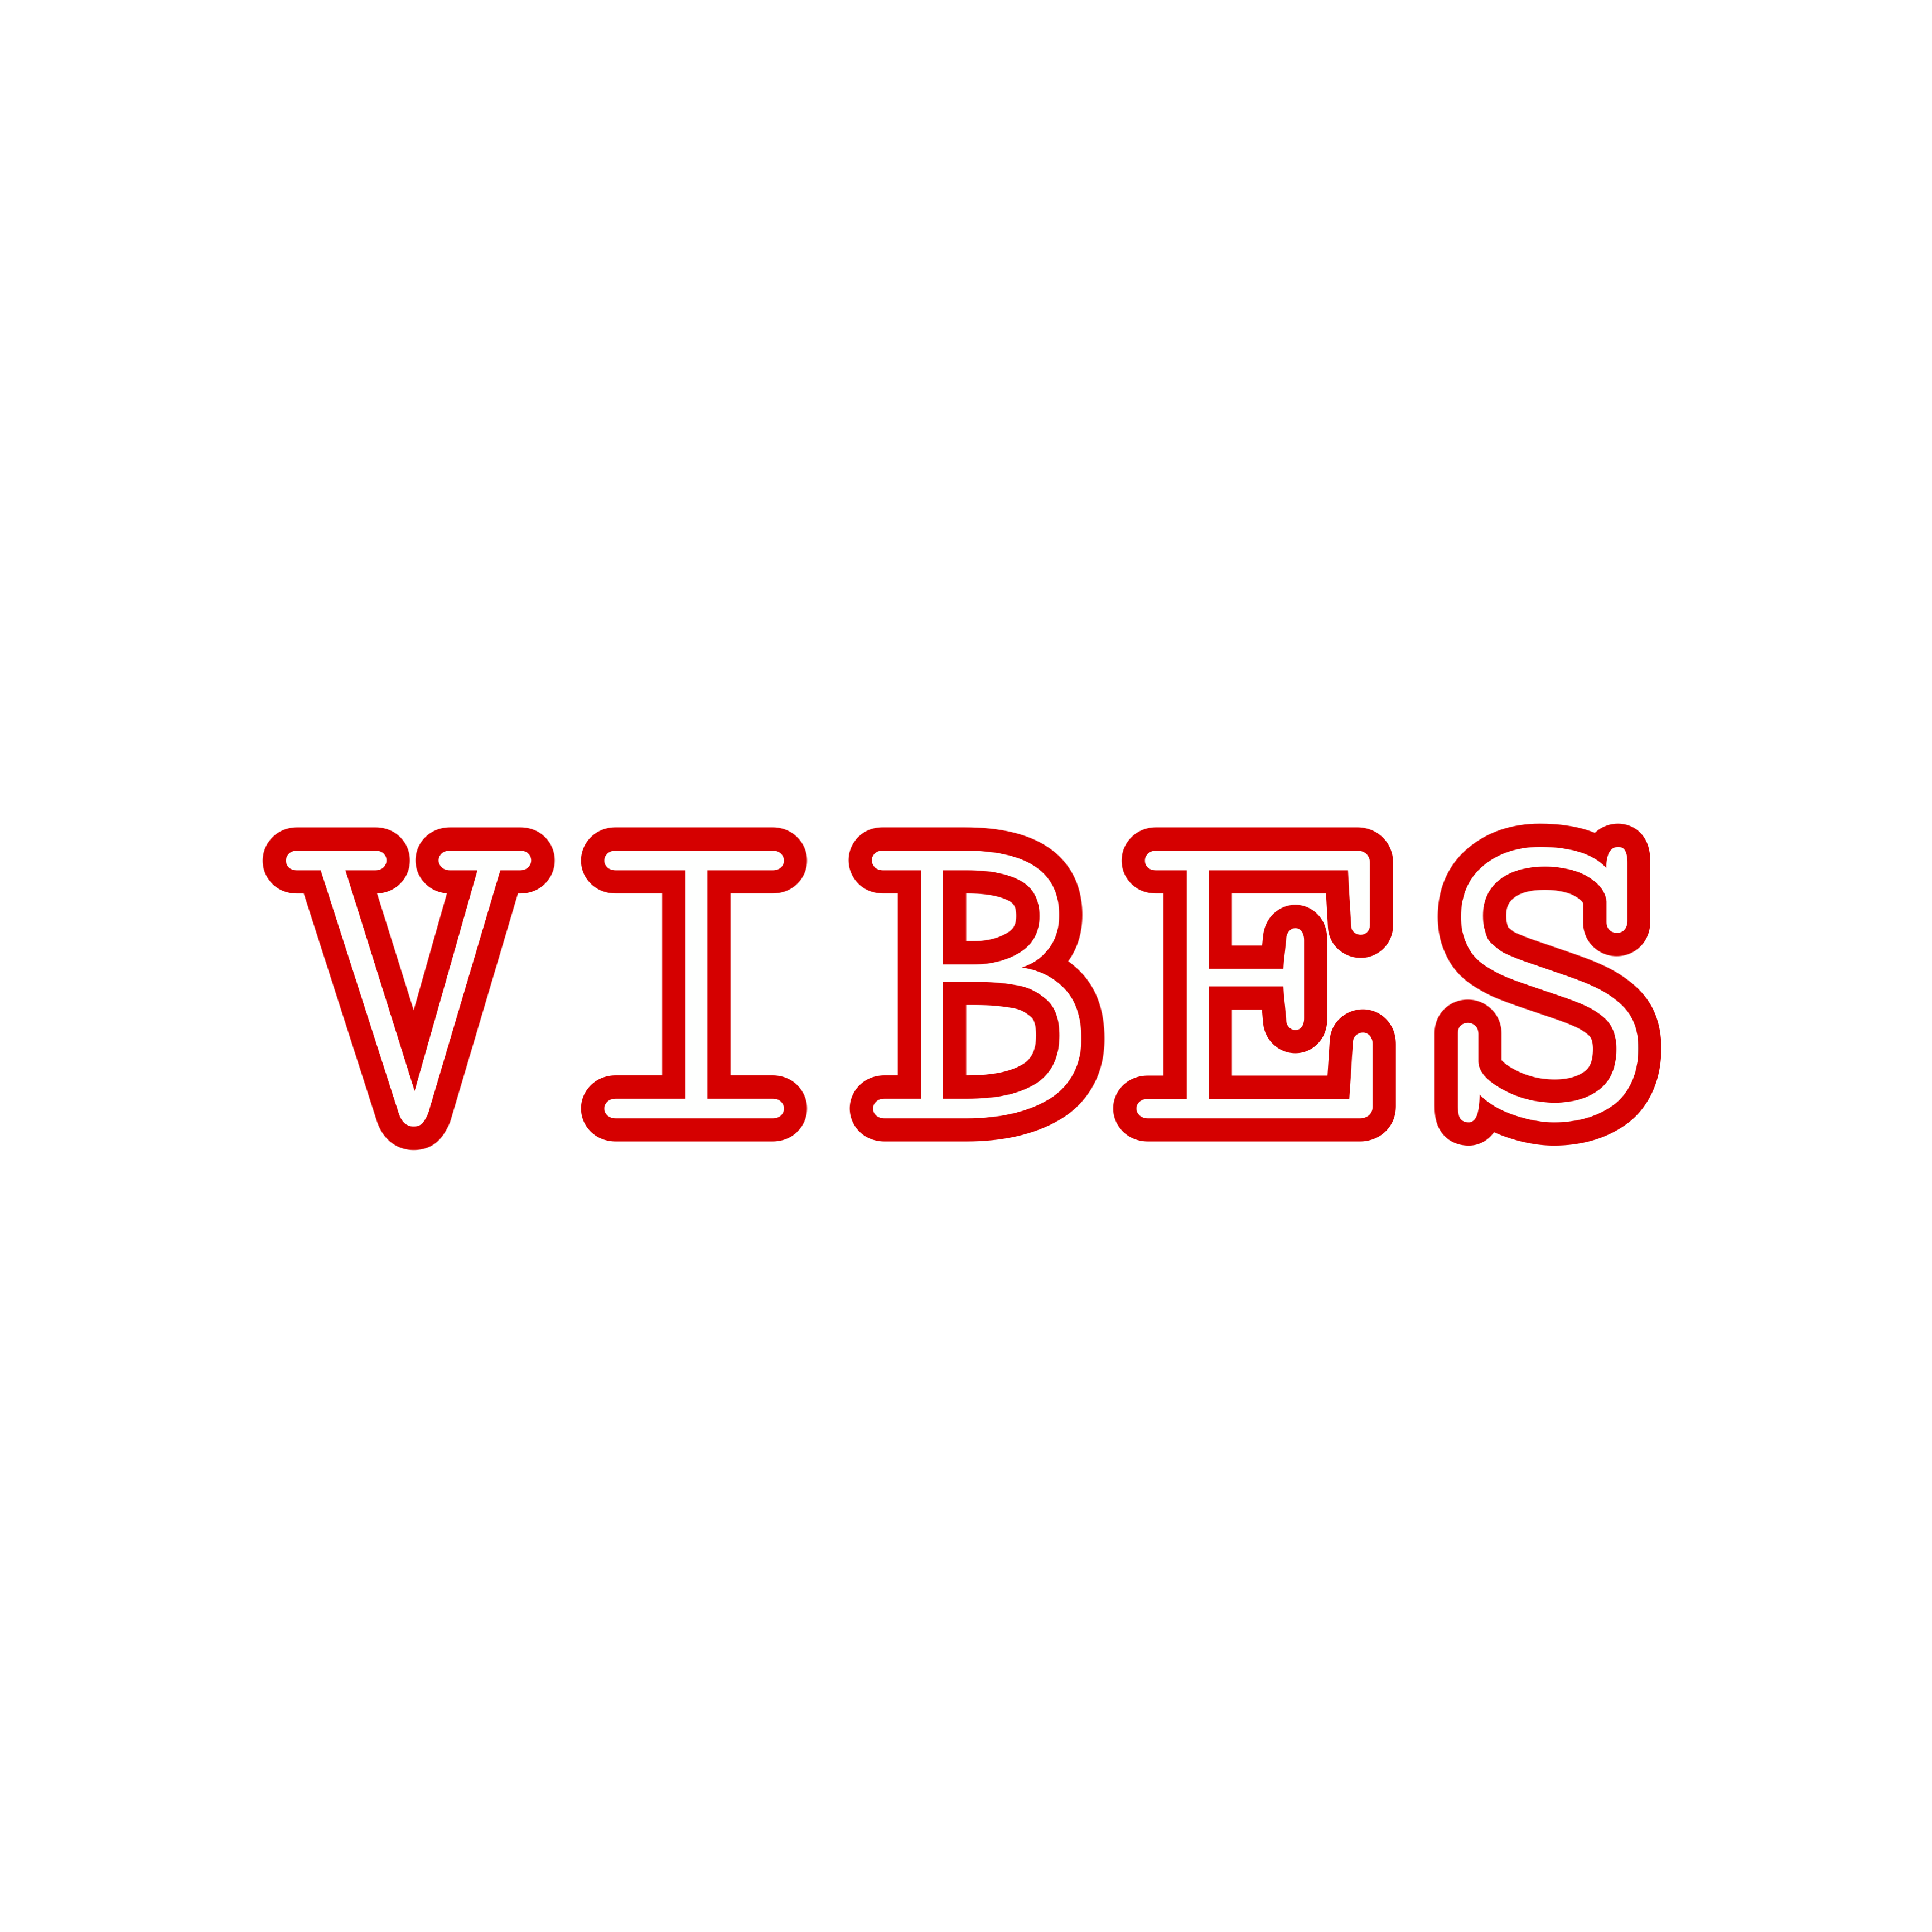 vibes aesthetic freetoedit #vibes sticker by @mandyturtlezz